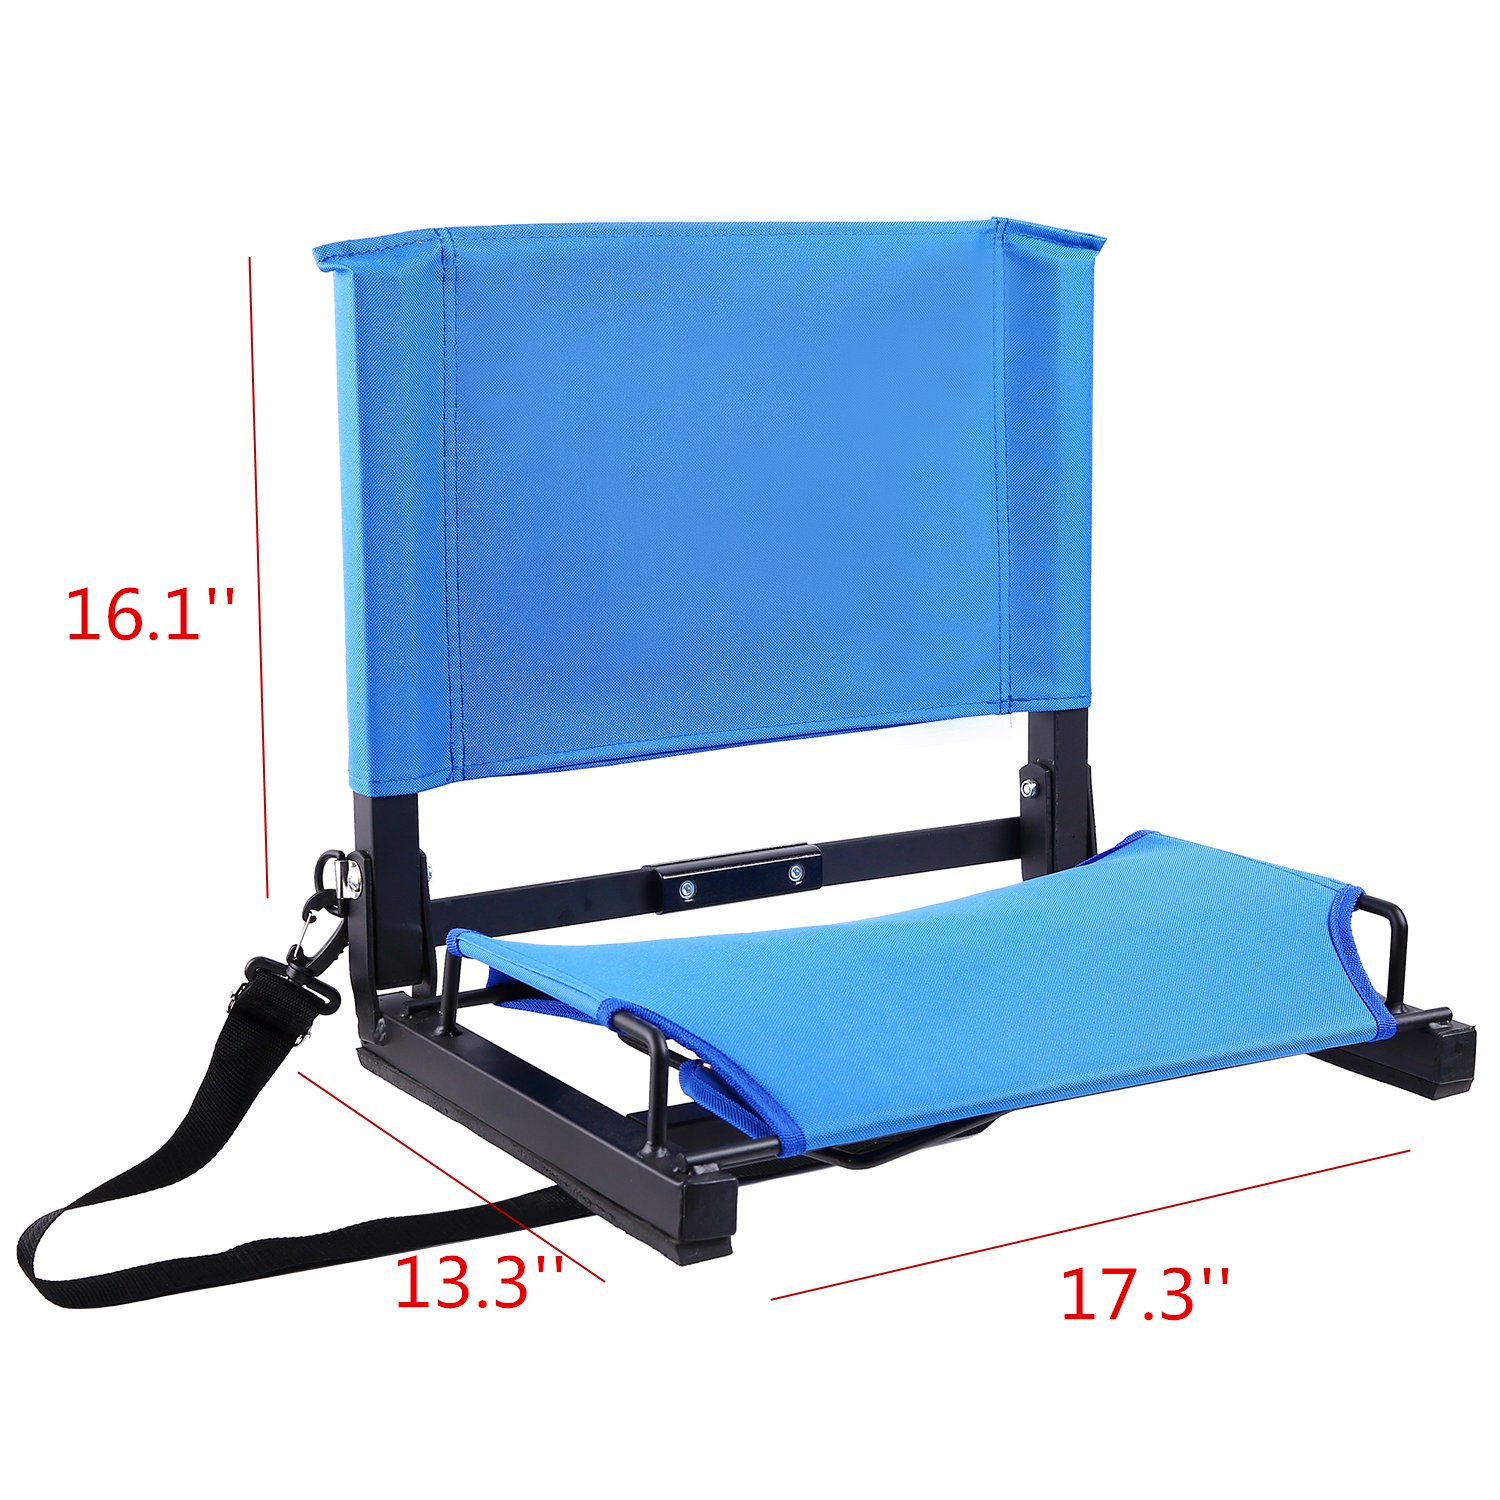 https://www.ambromanufacturing.com/wp-content/uploads/2019/09/stadium-seat-with-armrest-1.jpg